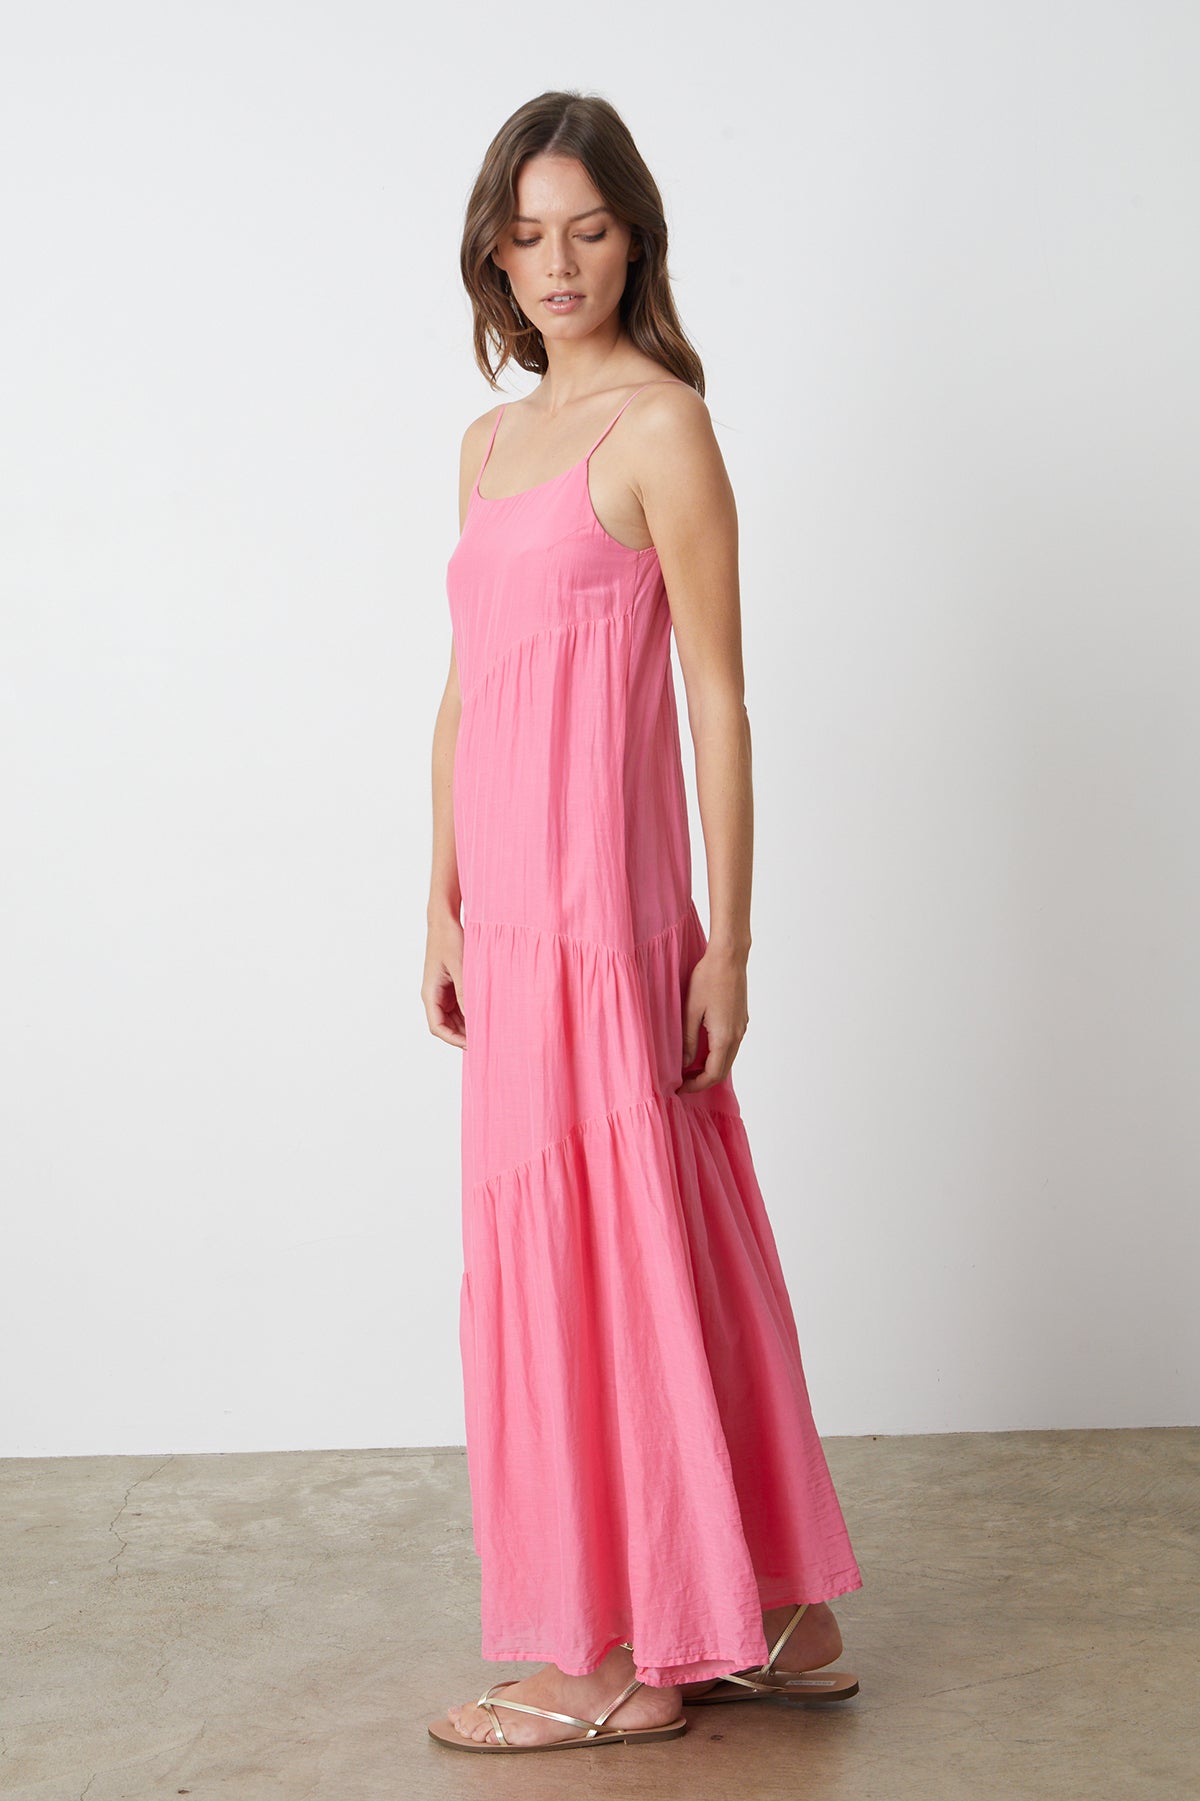 The model is wearing a pink Velvet by Graham & Spencer BILLIE TIERED MAXI DRESS.-26342686326977